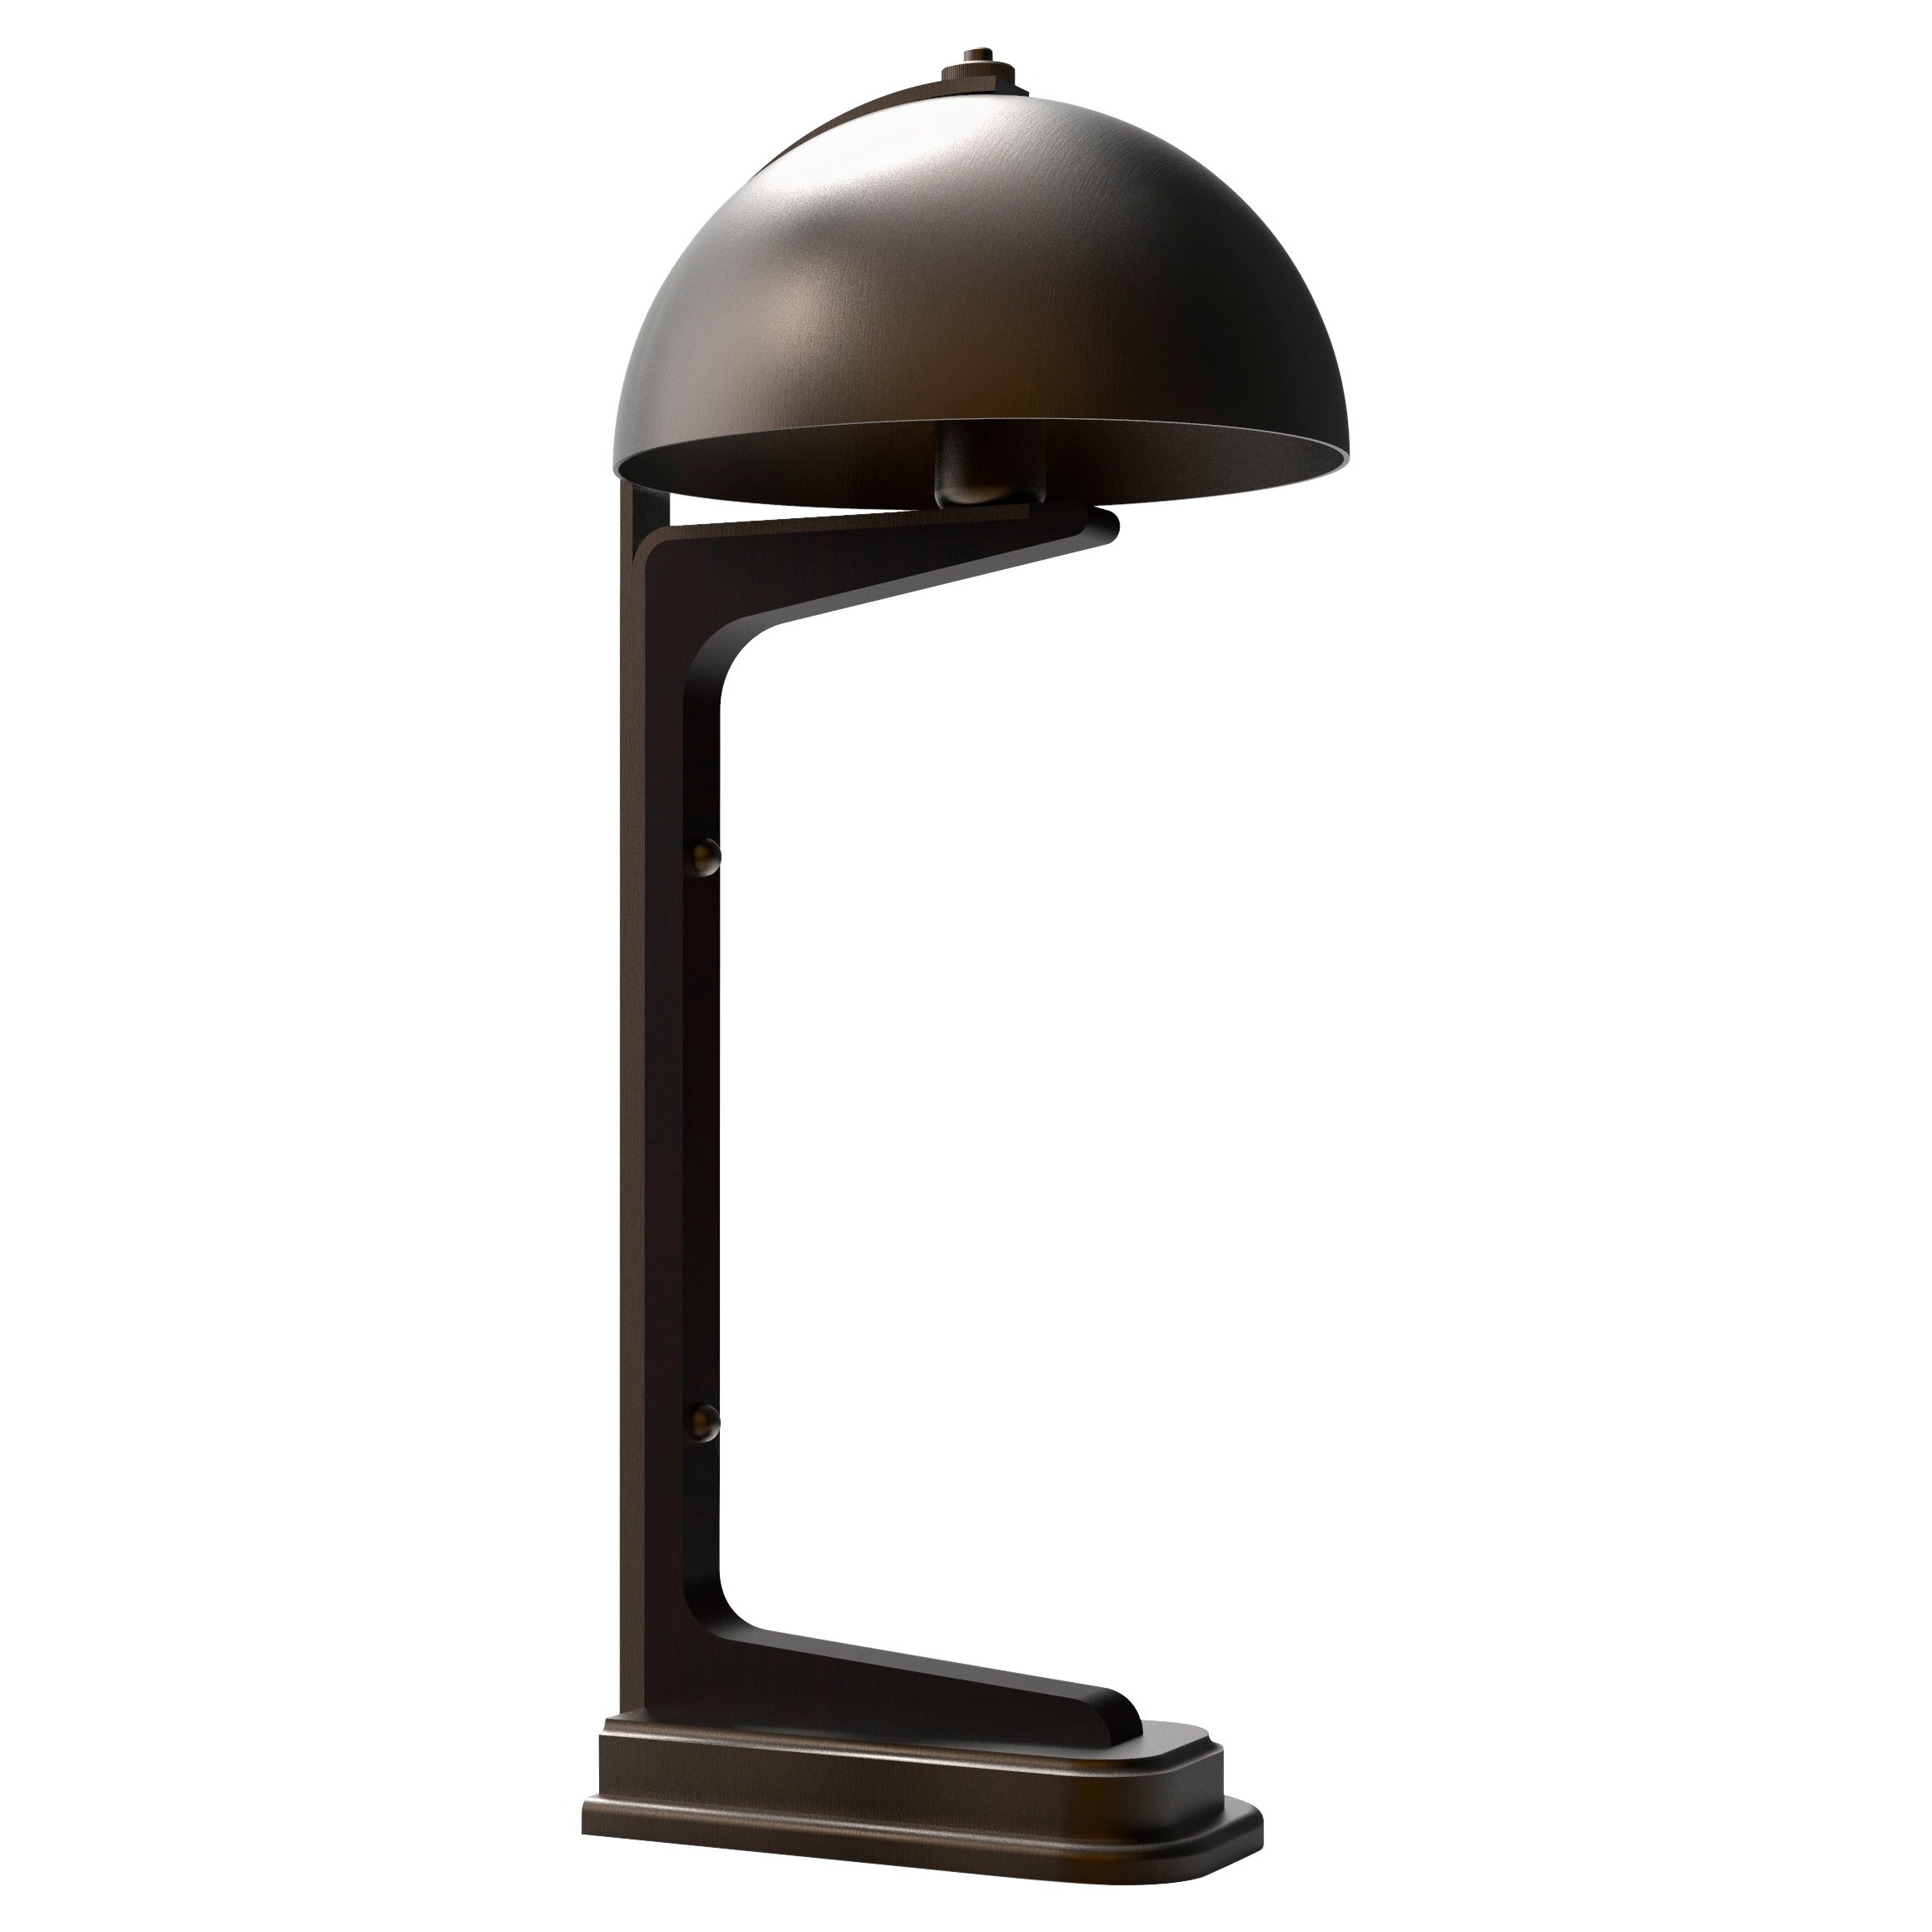 OP6 Table Lamp Exclusive Handmade in Italy